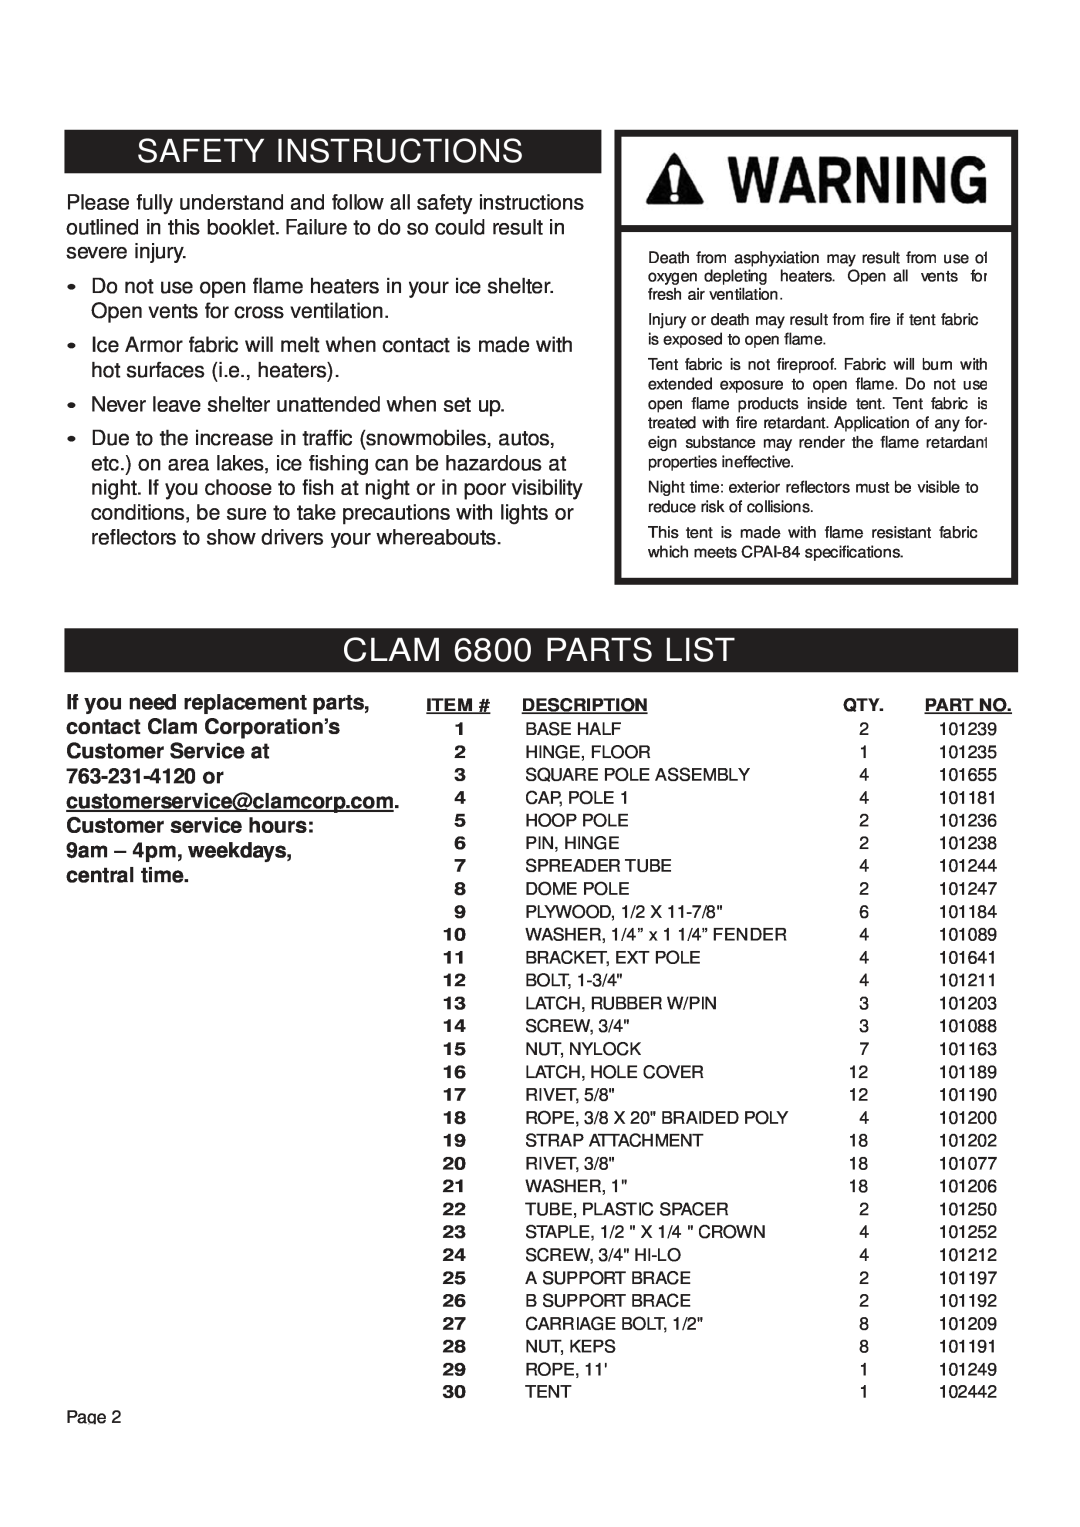 Clam Corp 8202 manual Safety Instructions, CLAM 6800 PARTS LIST, 9am -4pm, weekdays, central time 